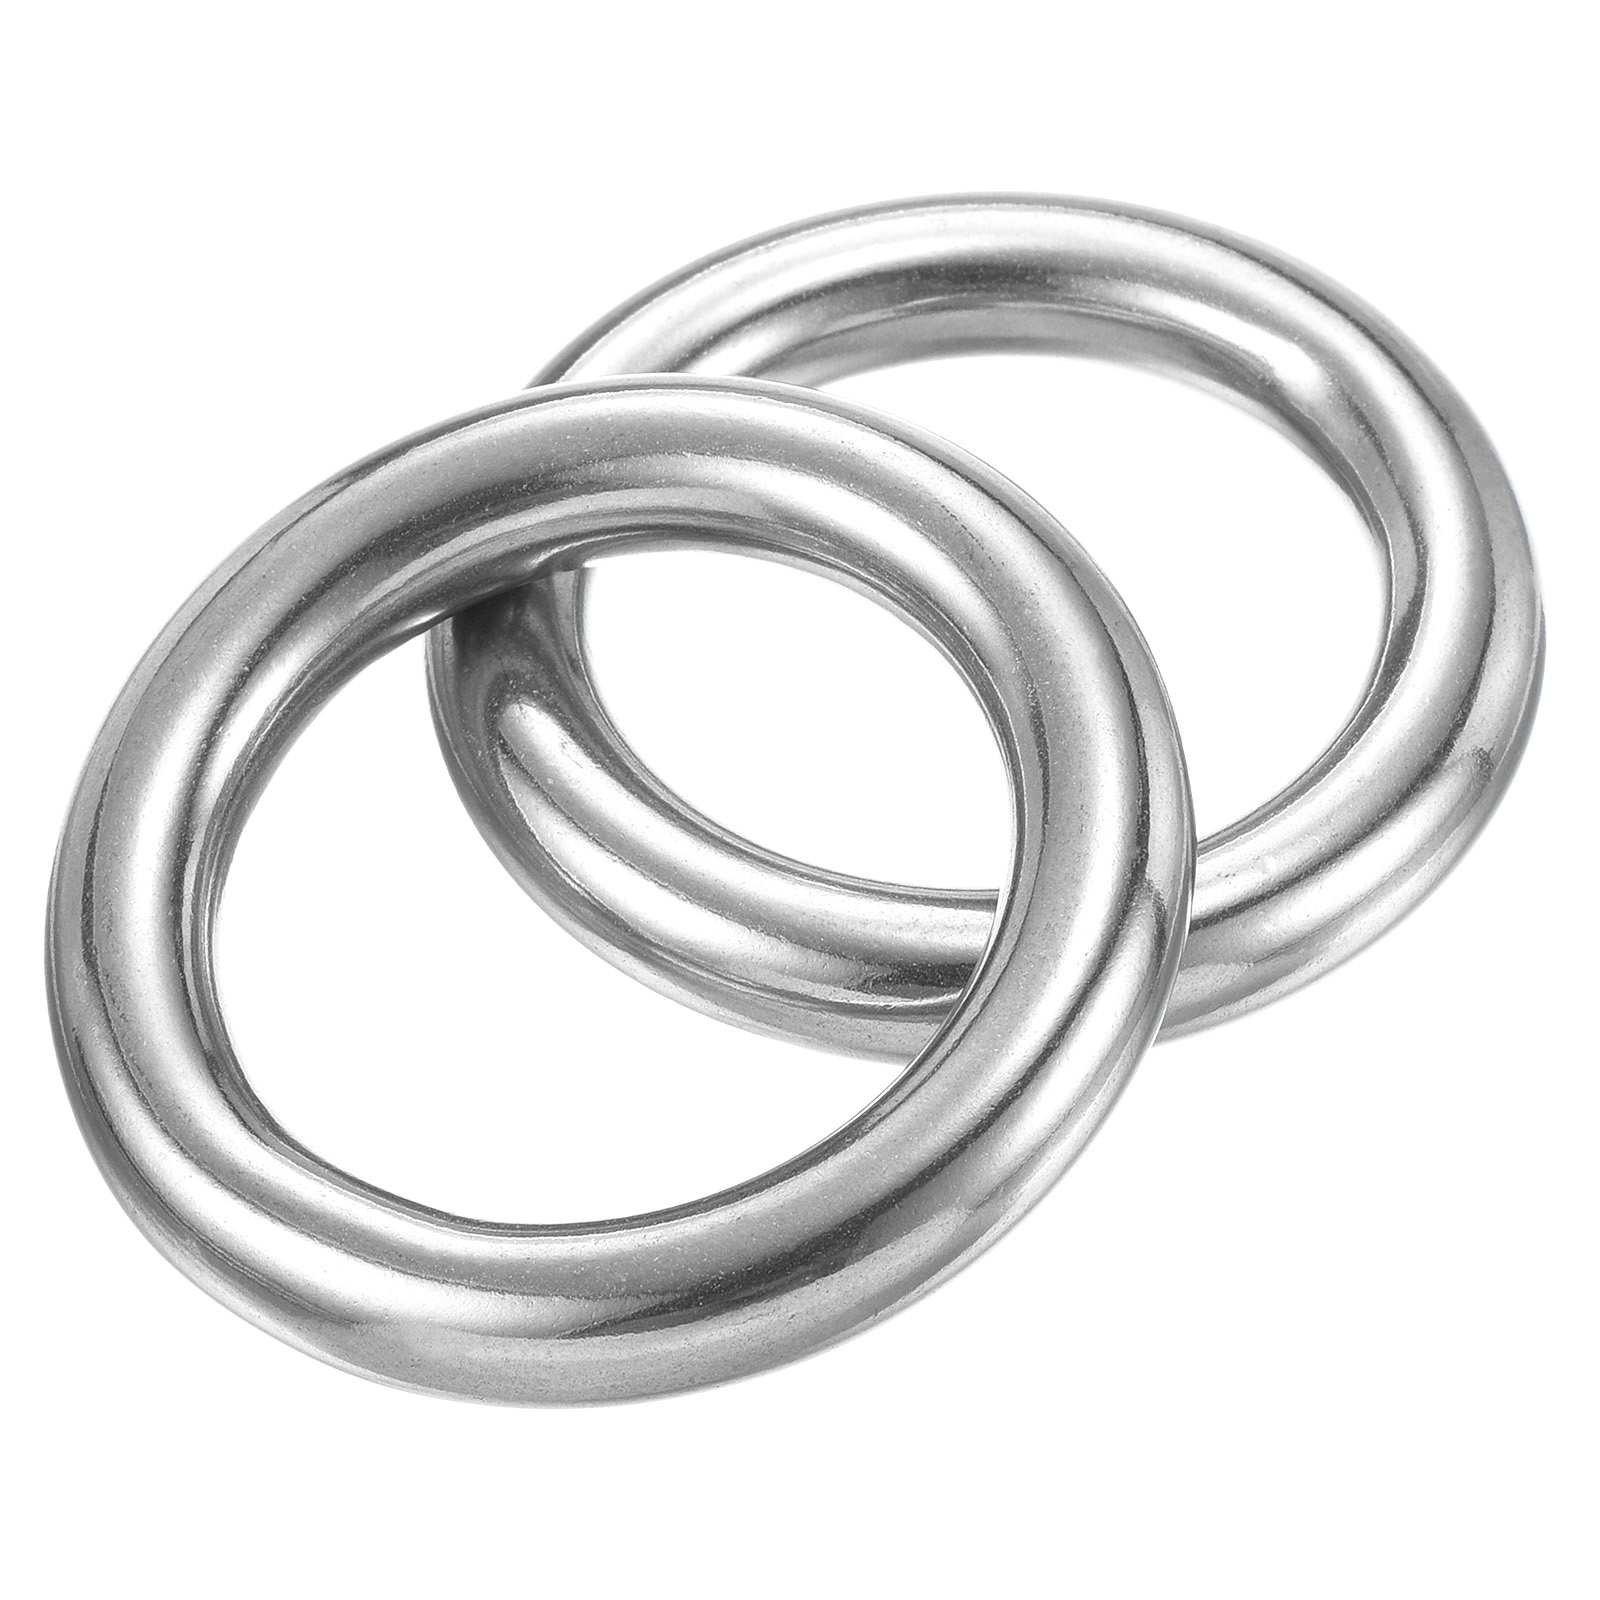 Unique Bargains Metal O Ring 304 Stainless Steel Seamless Welded O-Ring for DIY 2pcs - Silver - 60mmx79mm